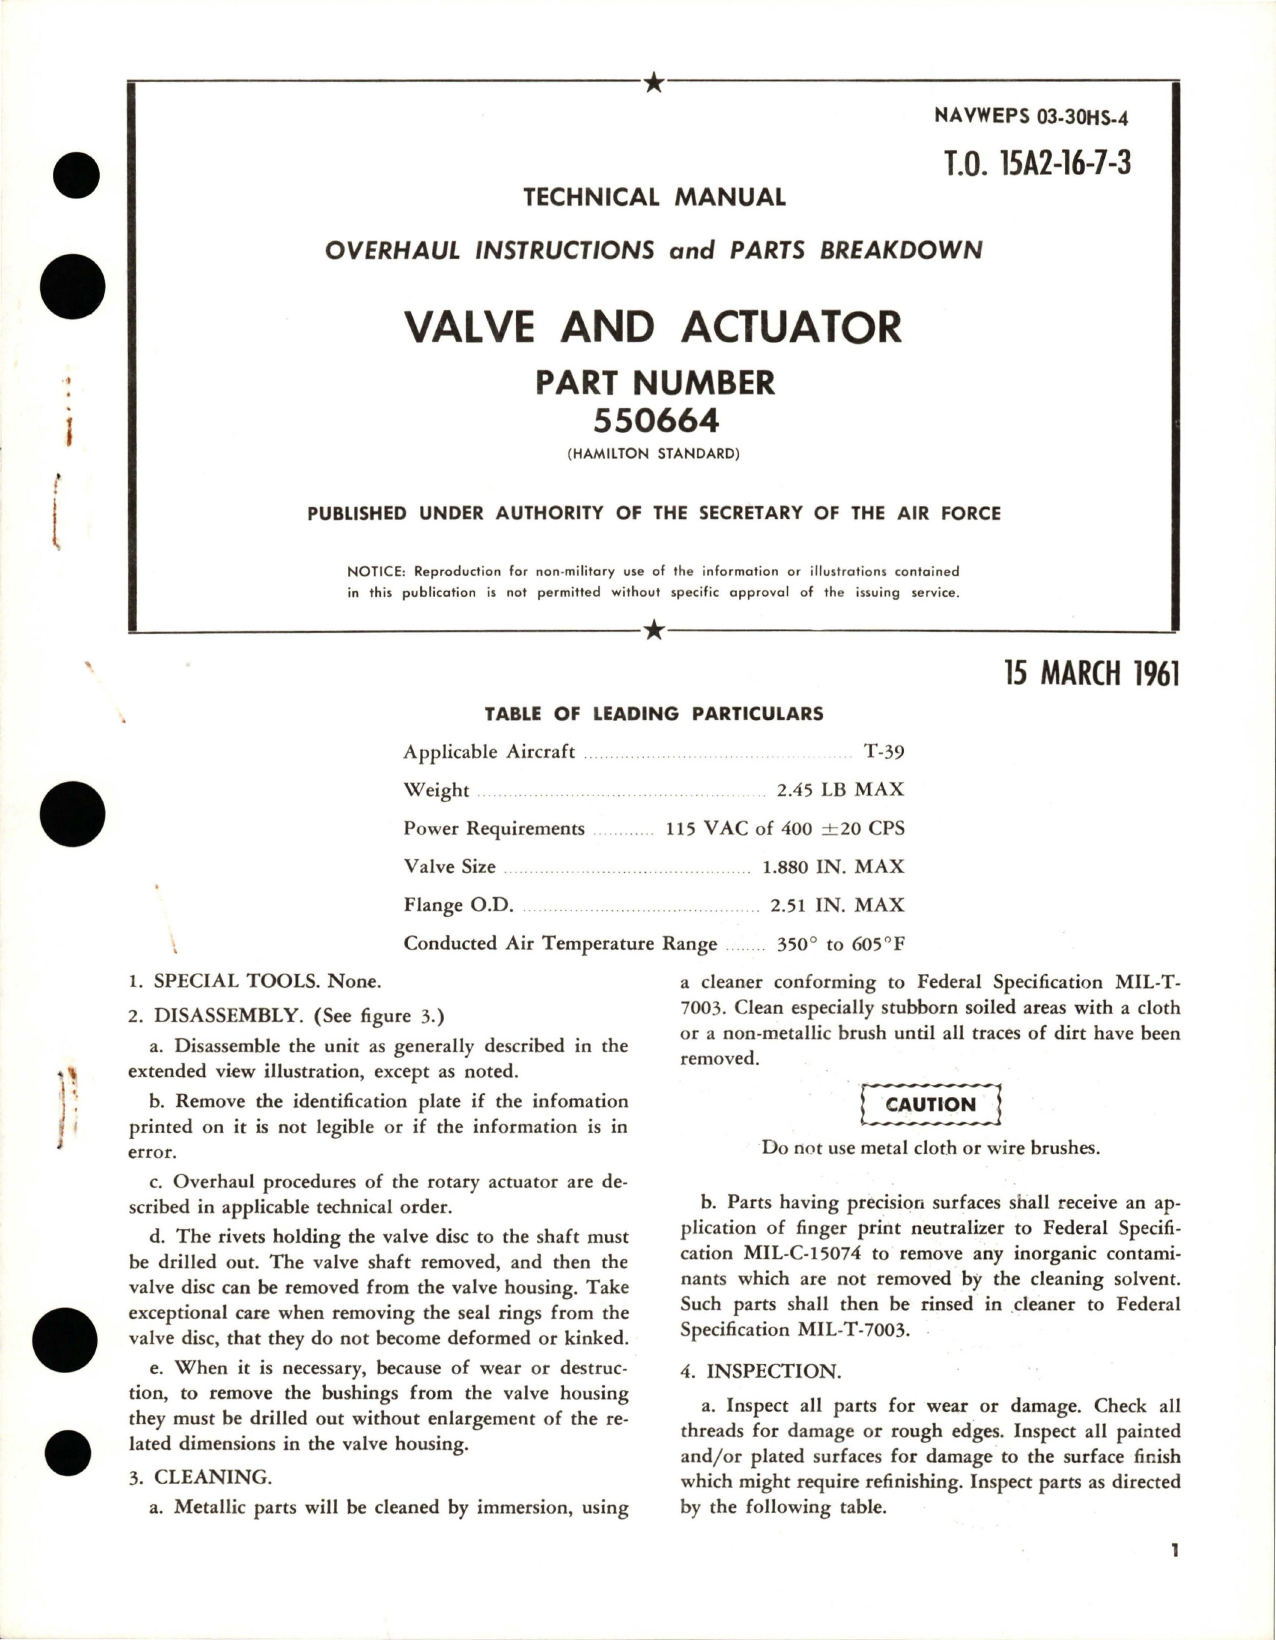 Sample page 1 from AirCorps Library document: Overhaul Instructions and Parts Breakdown for Valve and Actuator - Part 550664